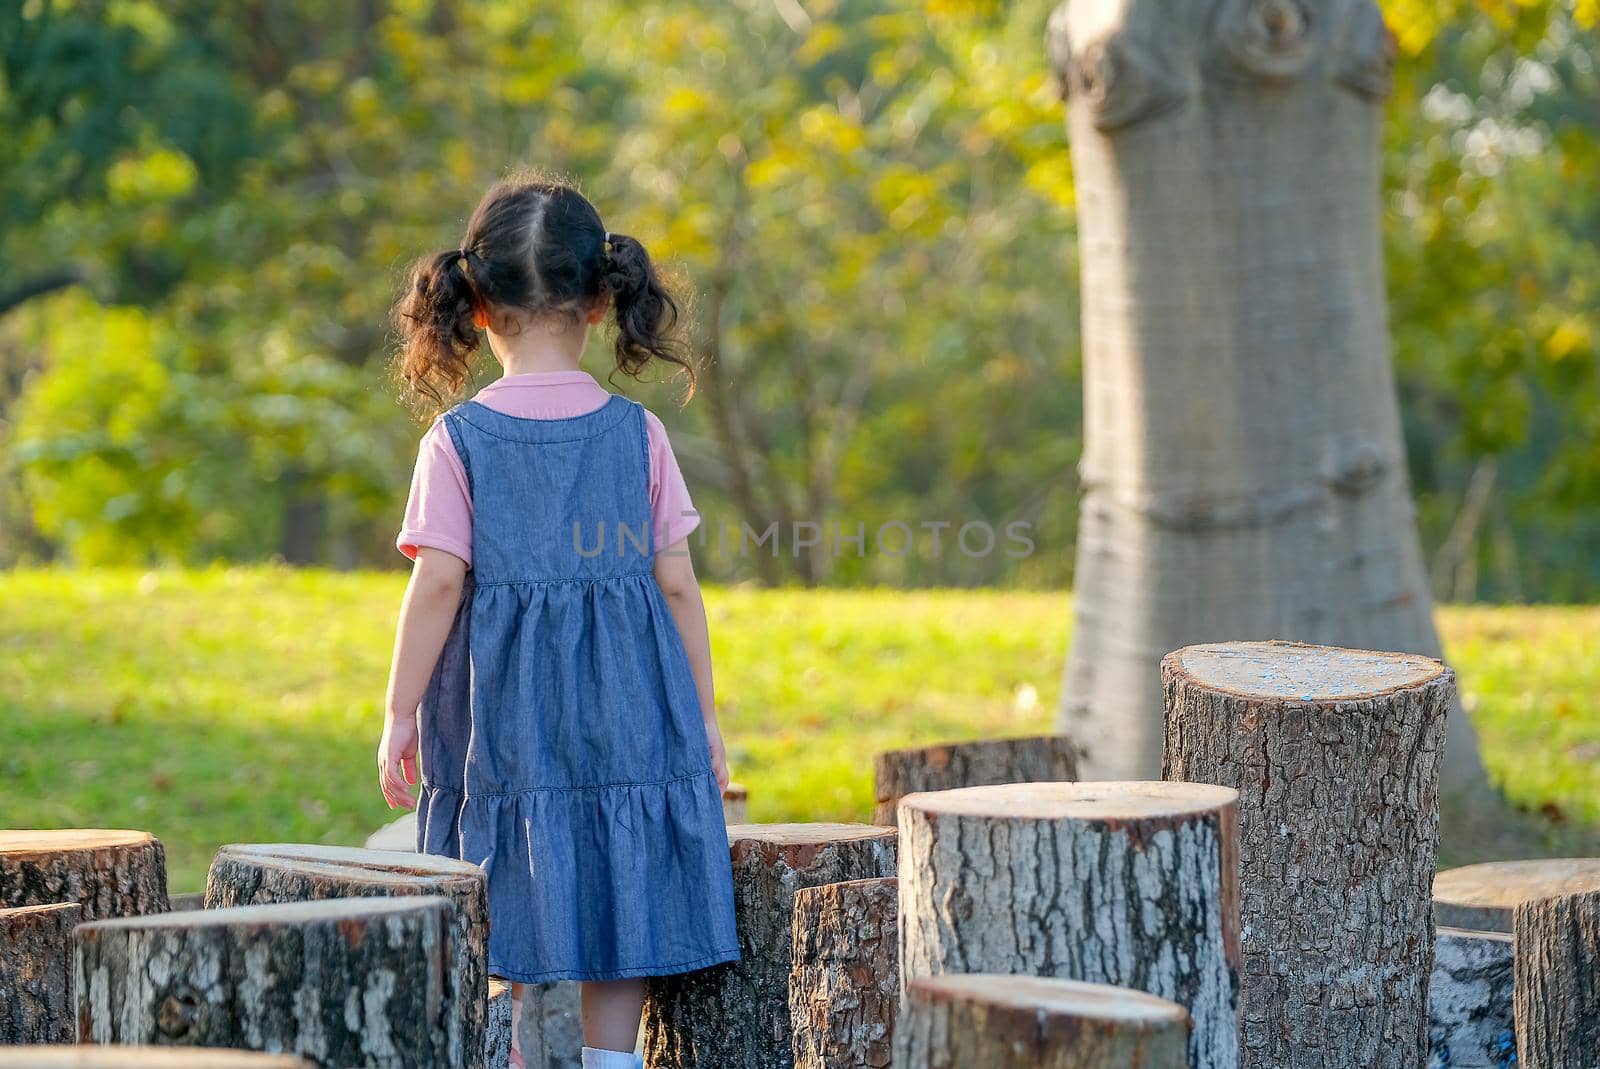 Soft blur of back of little girl walk in park with timber surround her and also morning light shine in front of her. by nrradmin